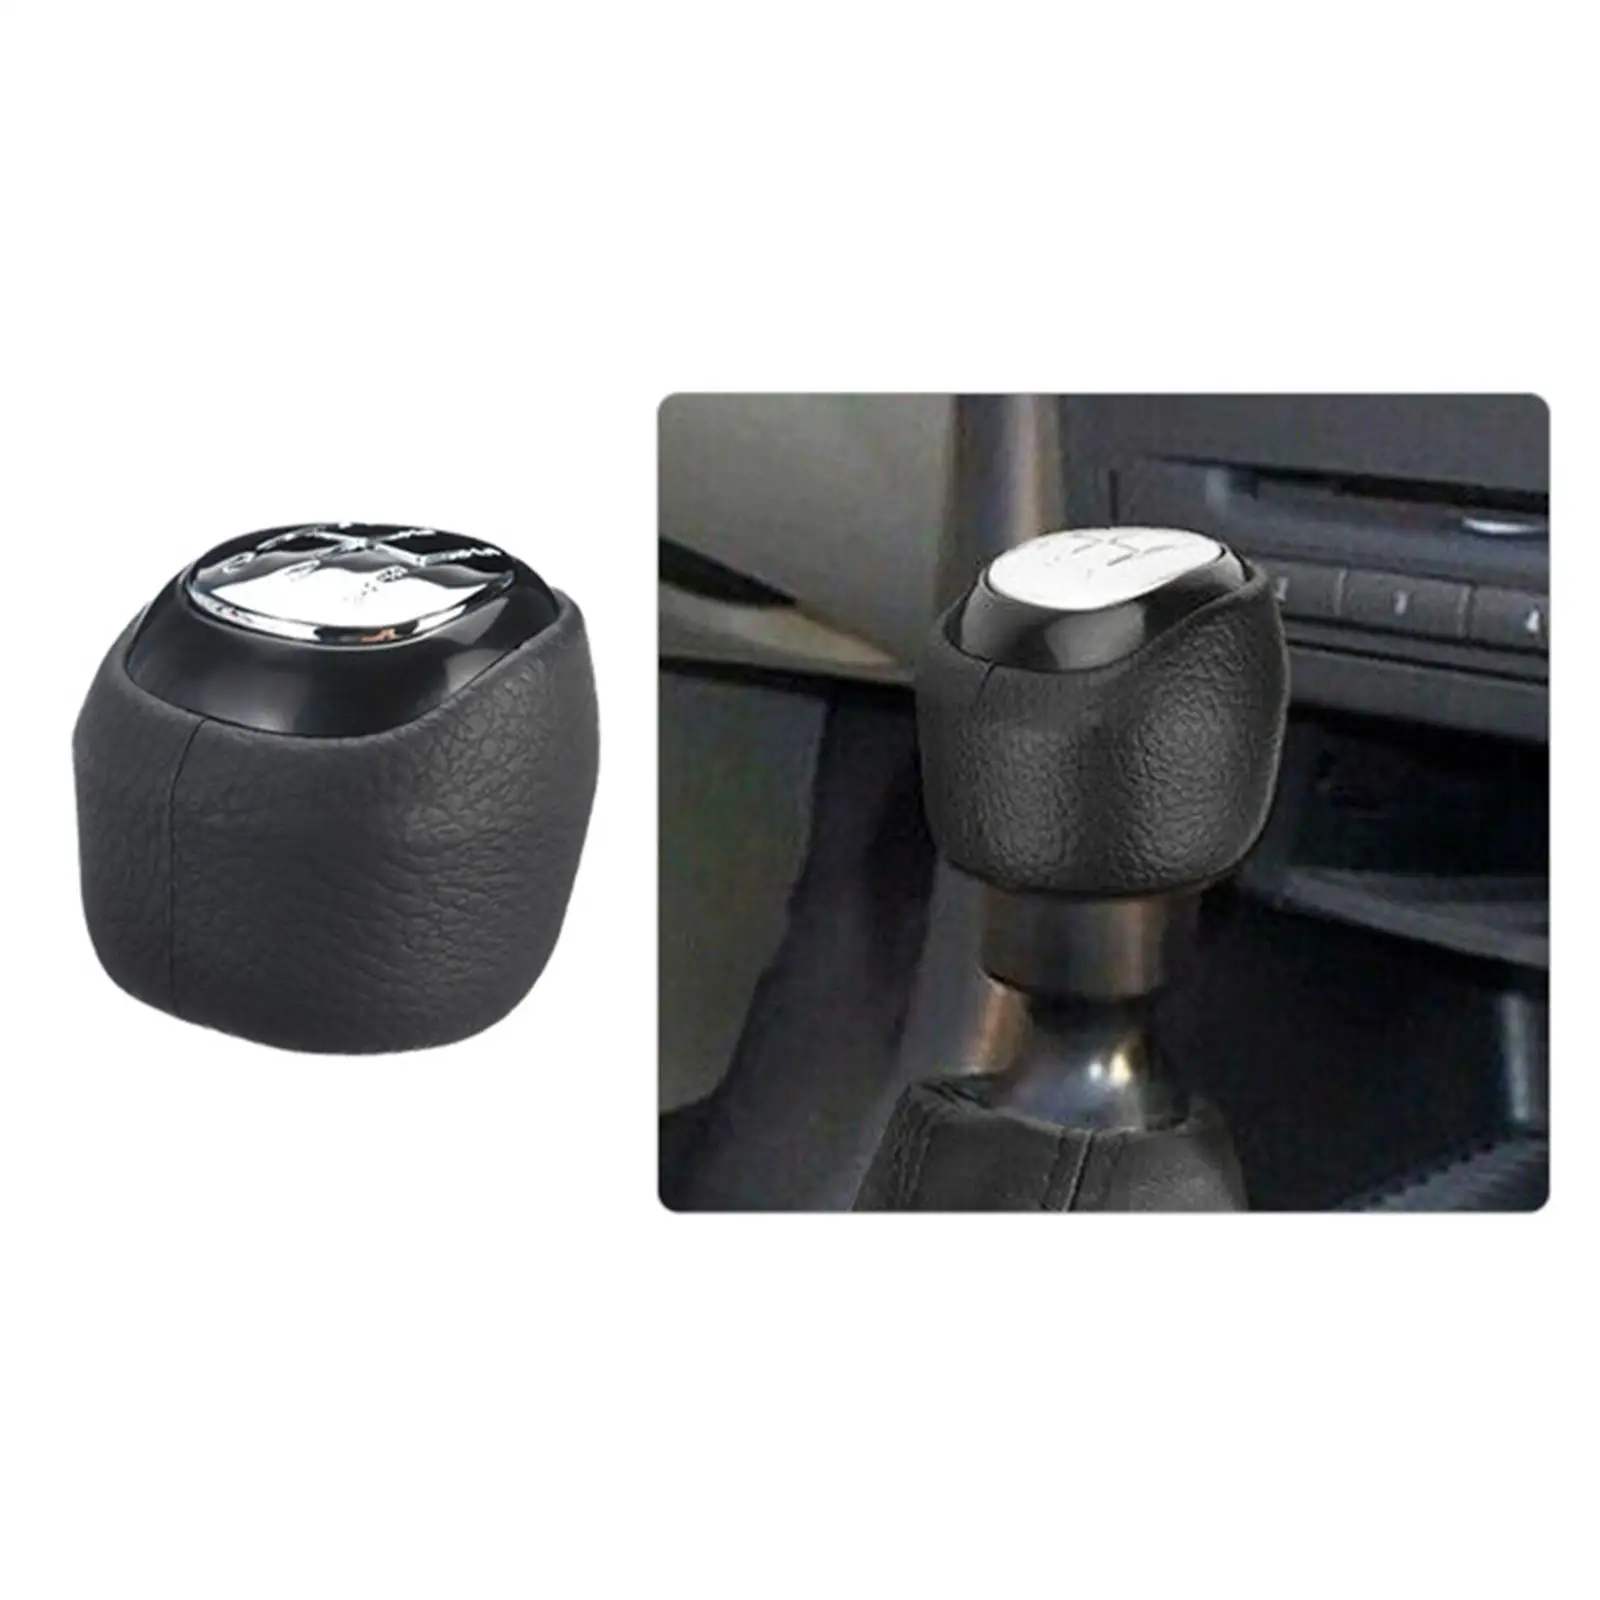 New Universal Auto Accessories Car 5 Speed Gear  Knob Stick er or T-Bar Boot Cover Adapter For SAAB 9-3 2003-2012